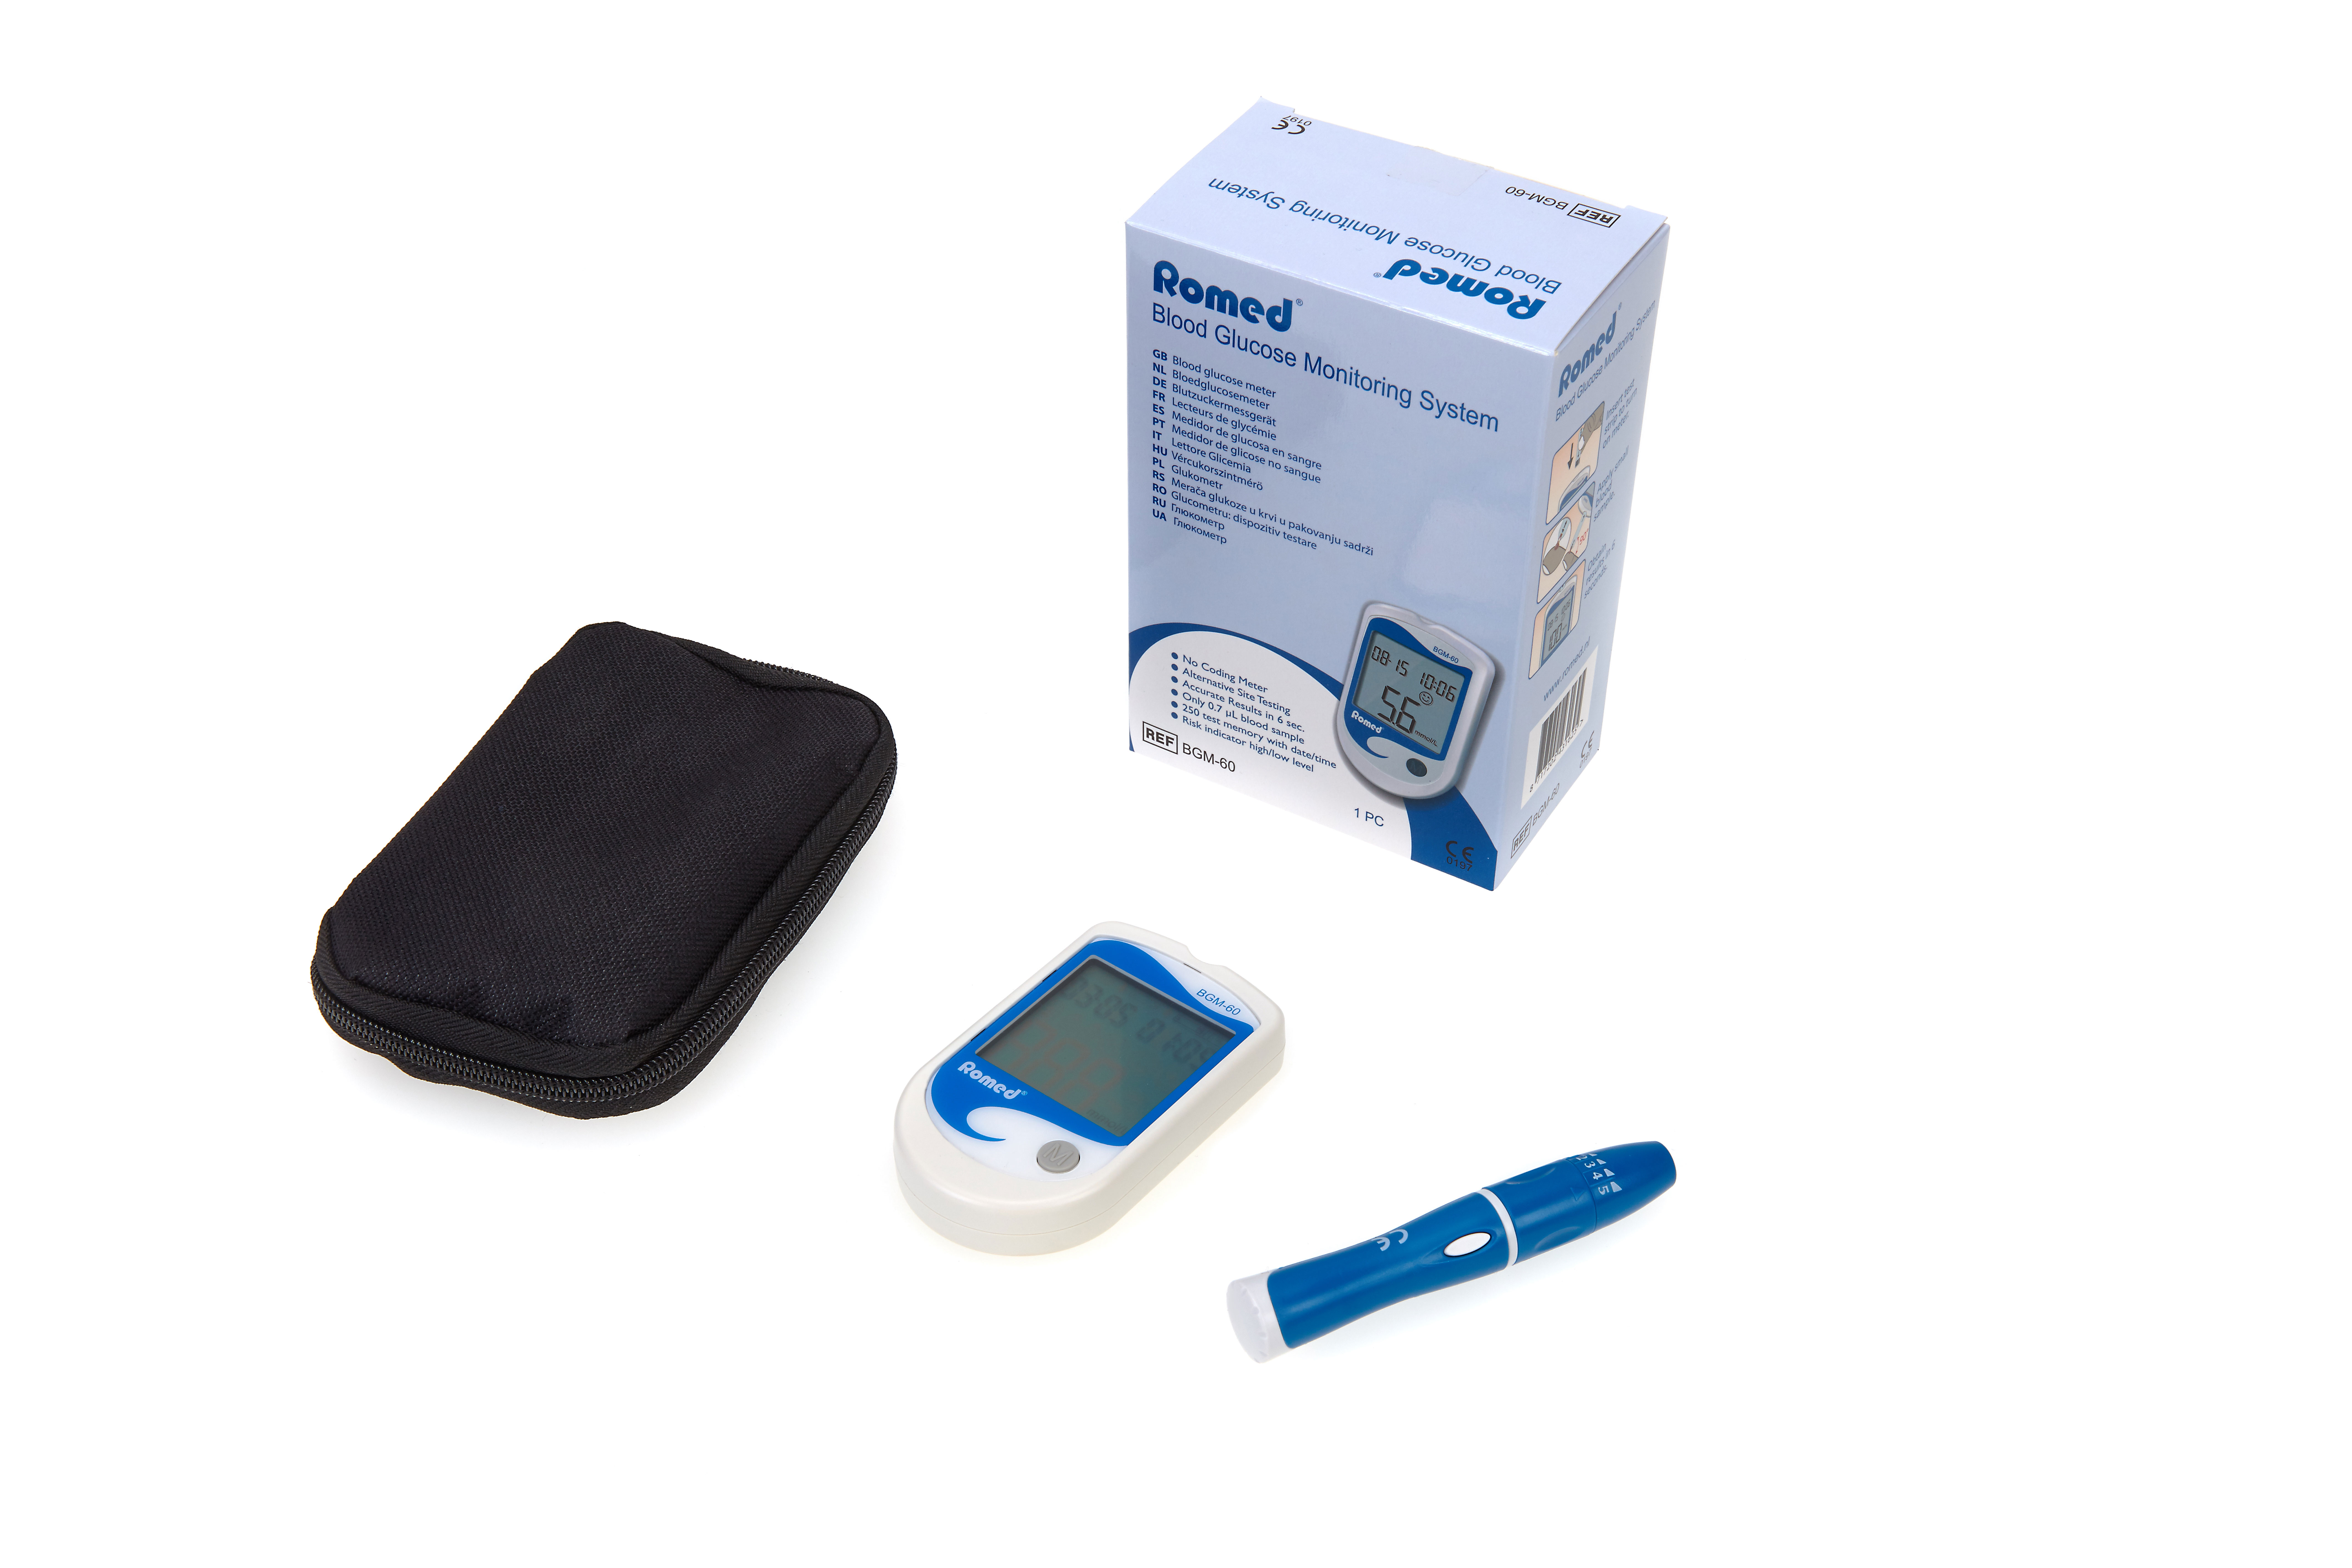 BGM-60 Romed blood glucose meters complete (incl. meter and lancing device and carrying case), packed per piece, 15 pcs in an inner box, 4 x 15 pcs = 60 pcs in a carton.